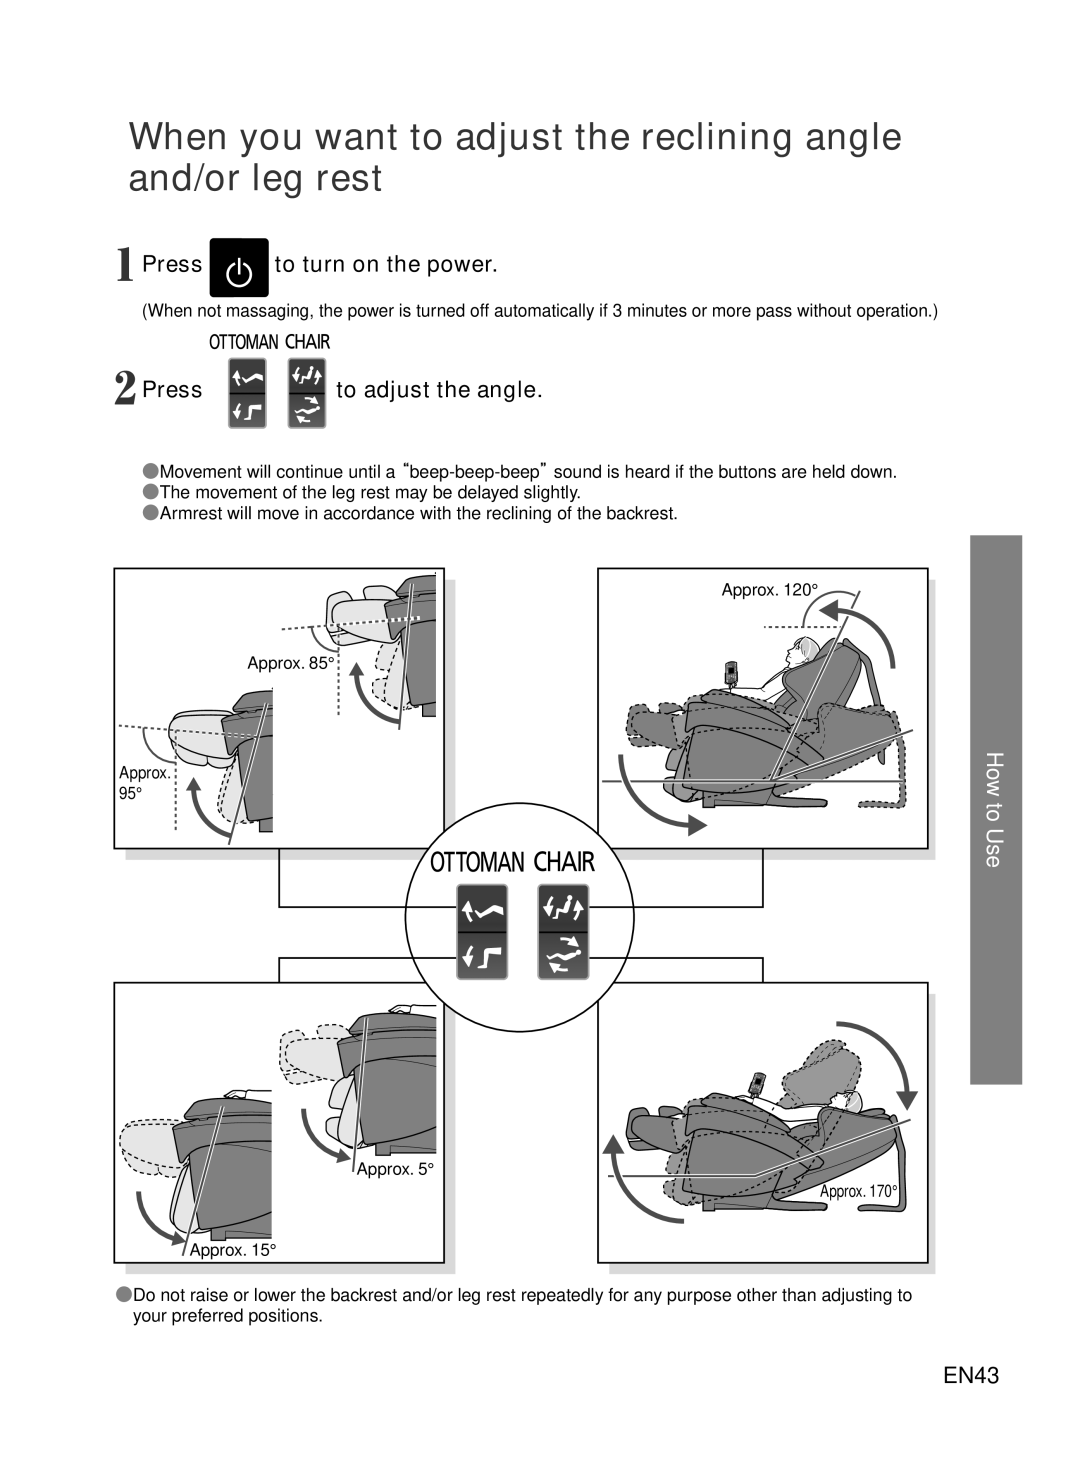 Panasonic EP-MA73 manual When you want to adjust the reclining angle and/or leg rest, Press to turn on the power, EN43 